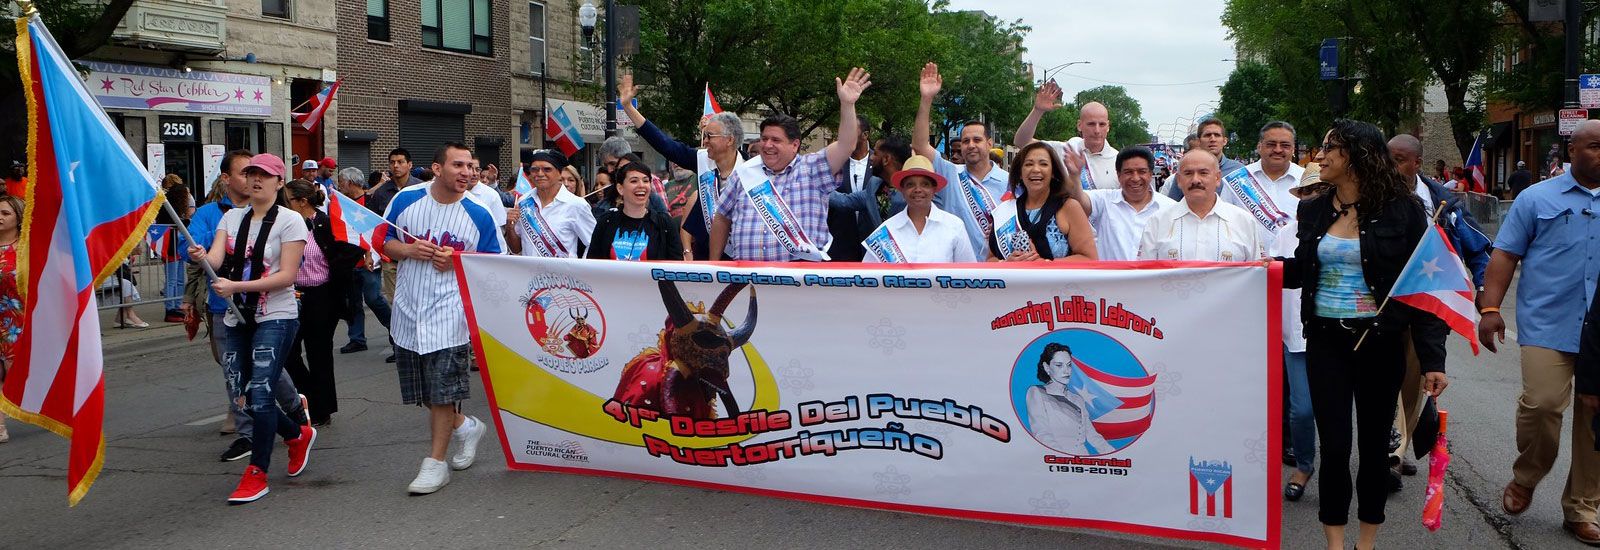 HITN CEO Grand Marshall of Chicago’s Puerto Rican Peoples Parade